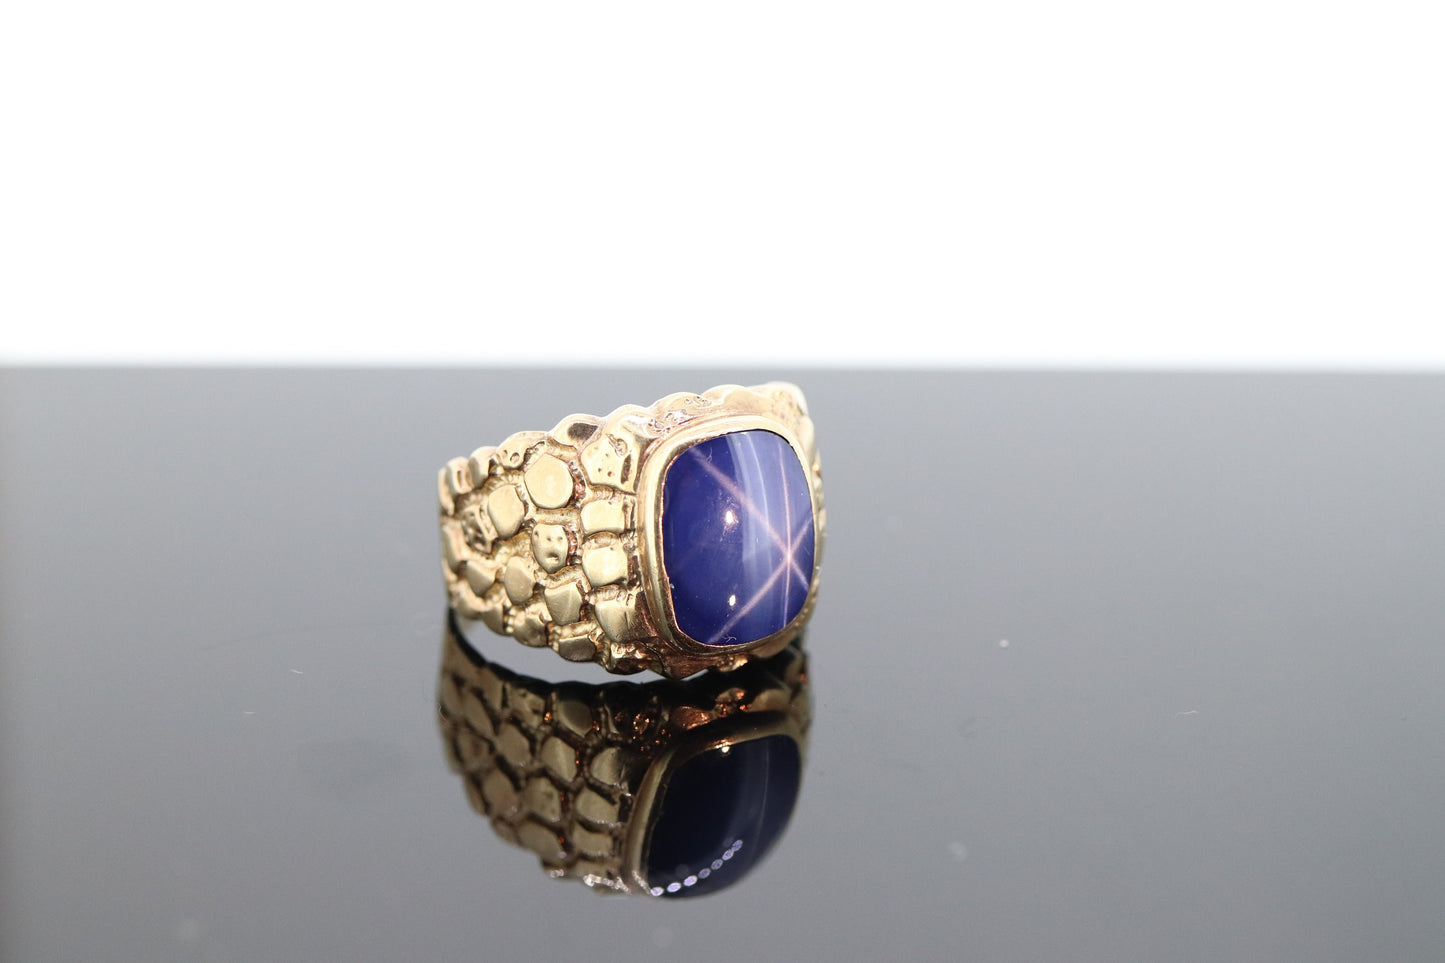 10k Star Sapphire ring. 10k Yellow Gold Nugget Mens Star Sapphire Cabochon signet ring. st(153)